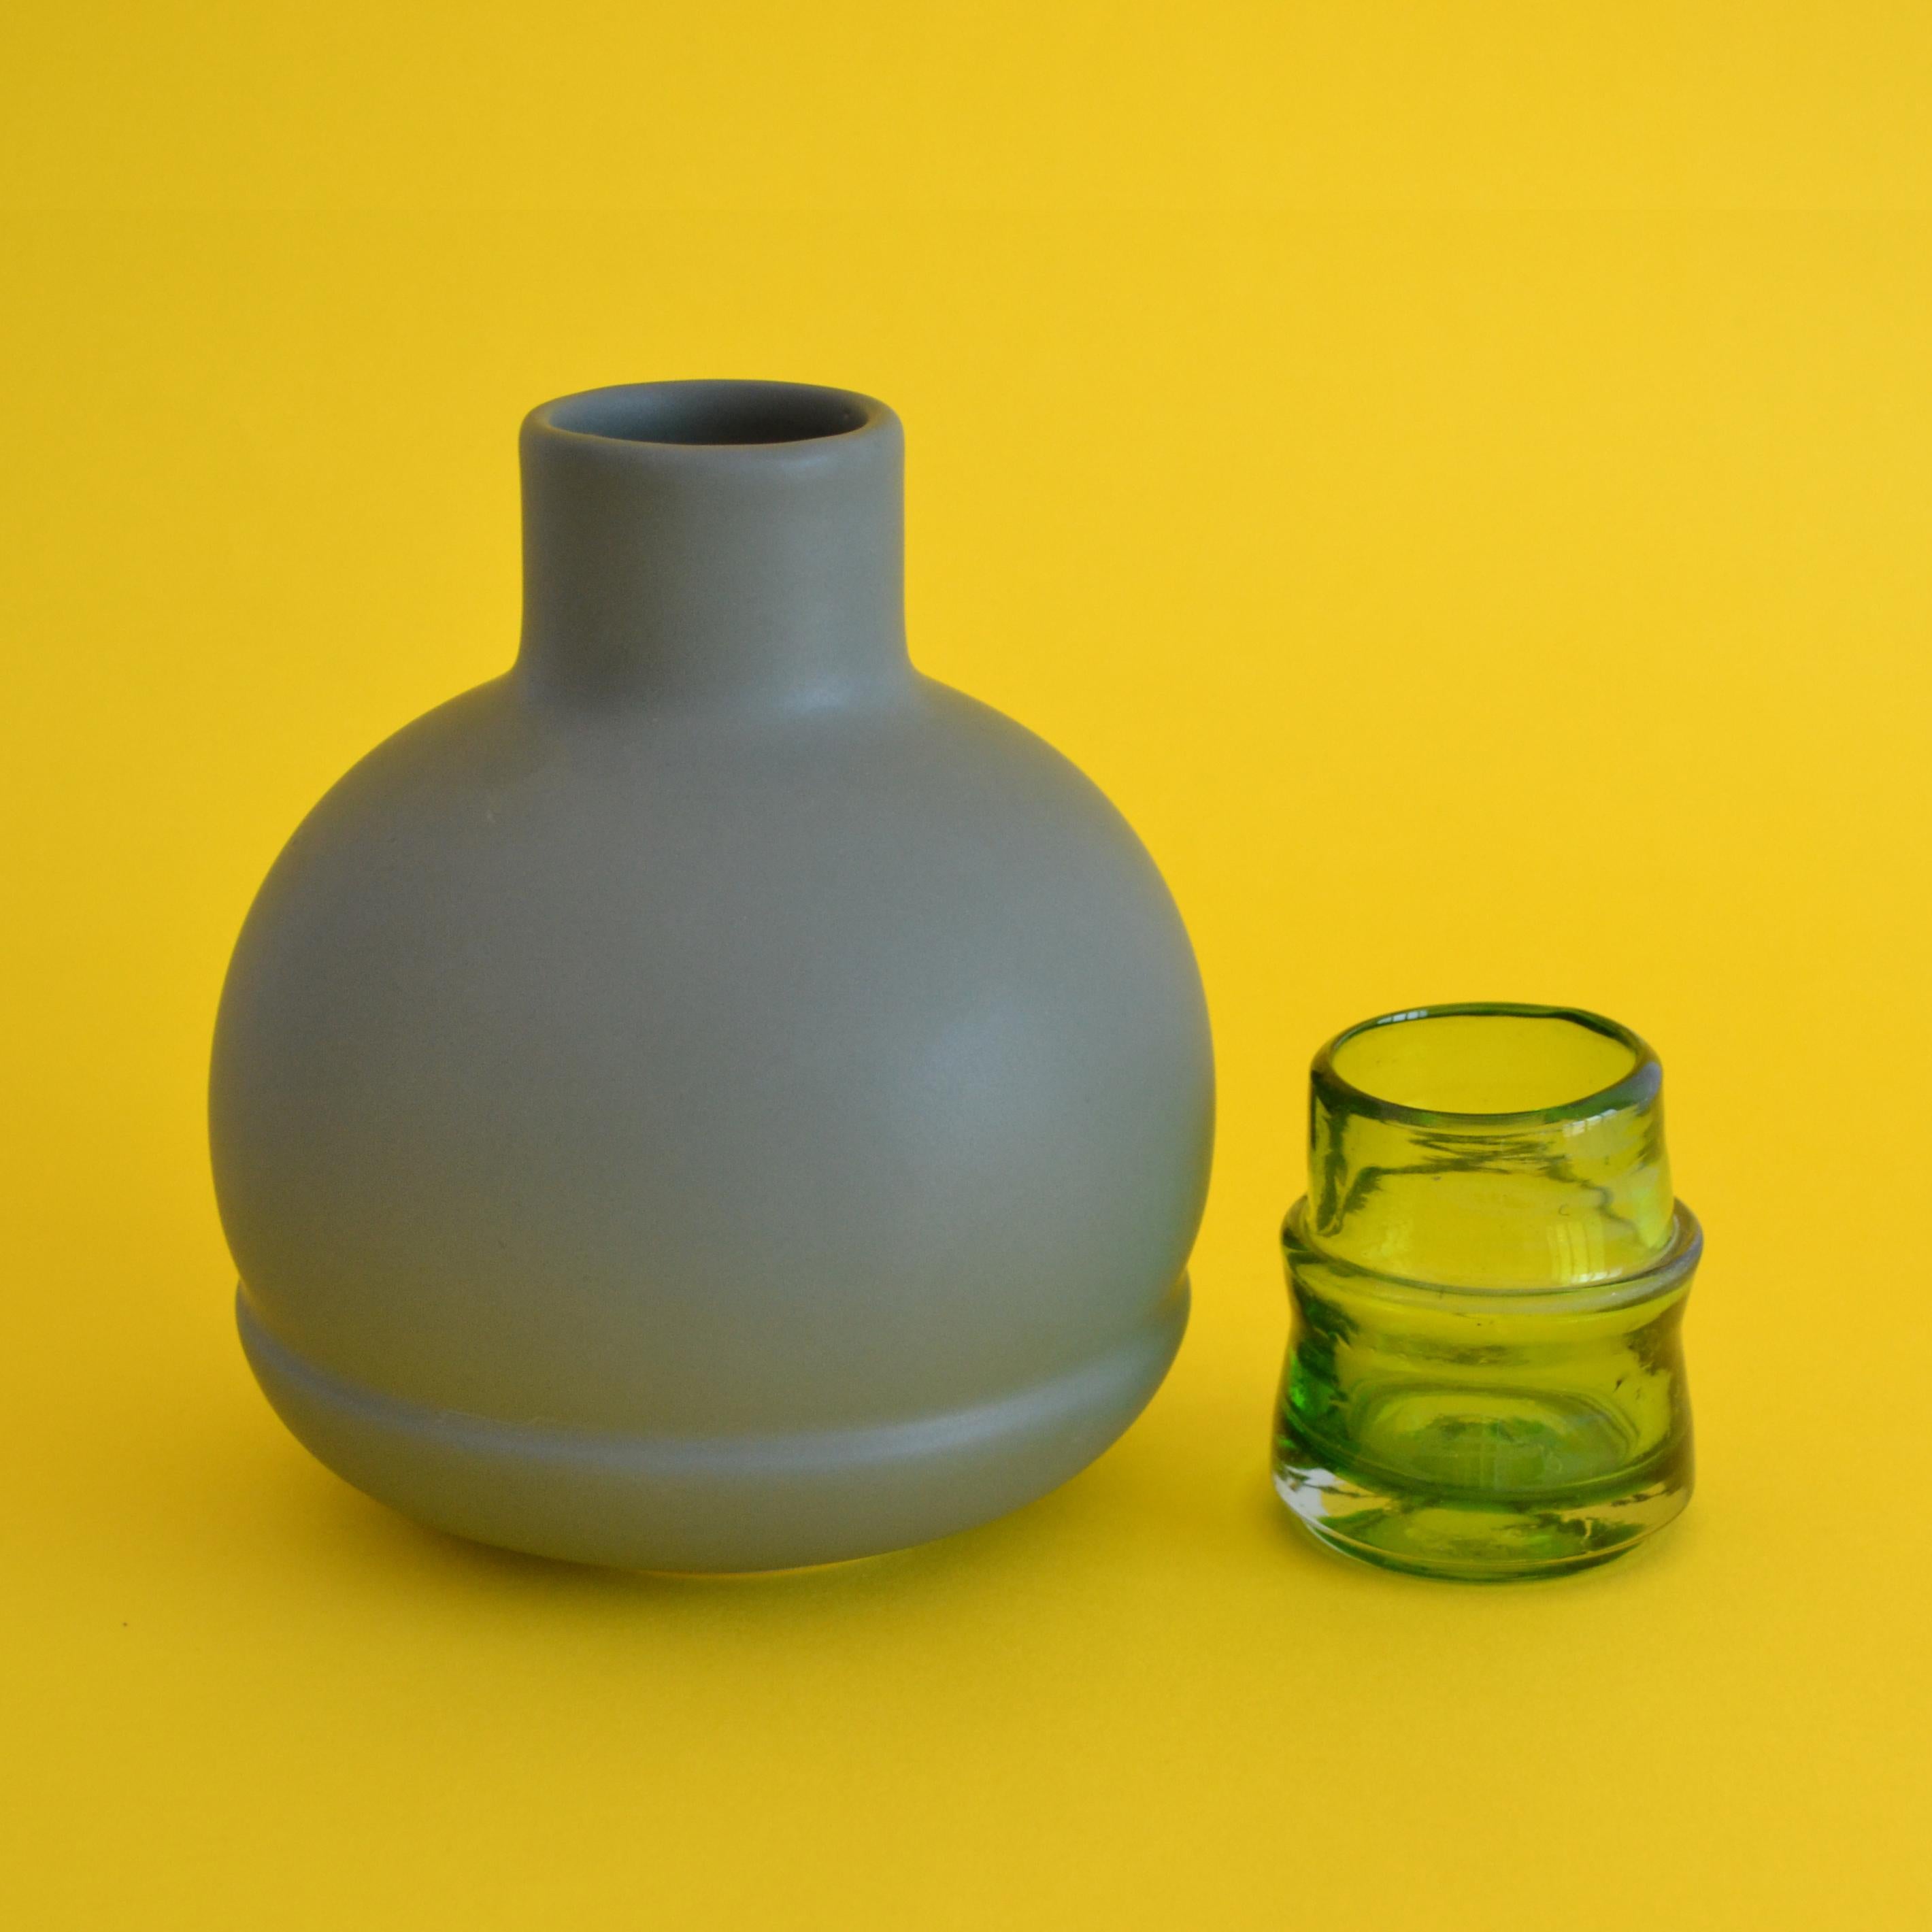 Our carafe colection is a tribute to the traditional pitchers of the regions of Tonala´ and Tlaquepaque in Jalisco, these two regions developed during the period of the conquest as pottery centers.
Originally these bottles were used to store water